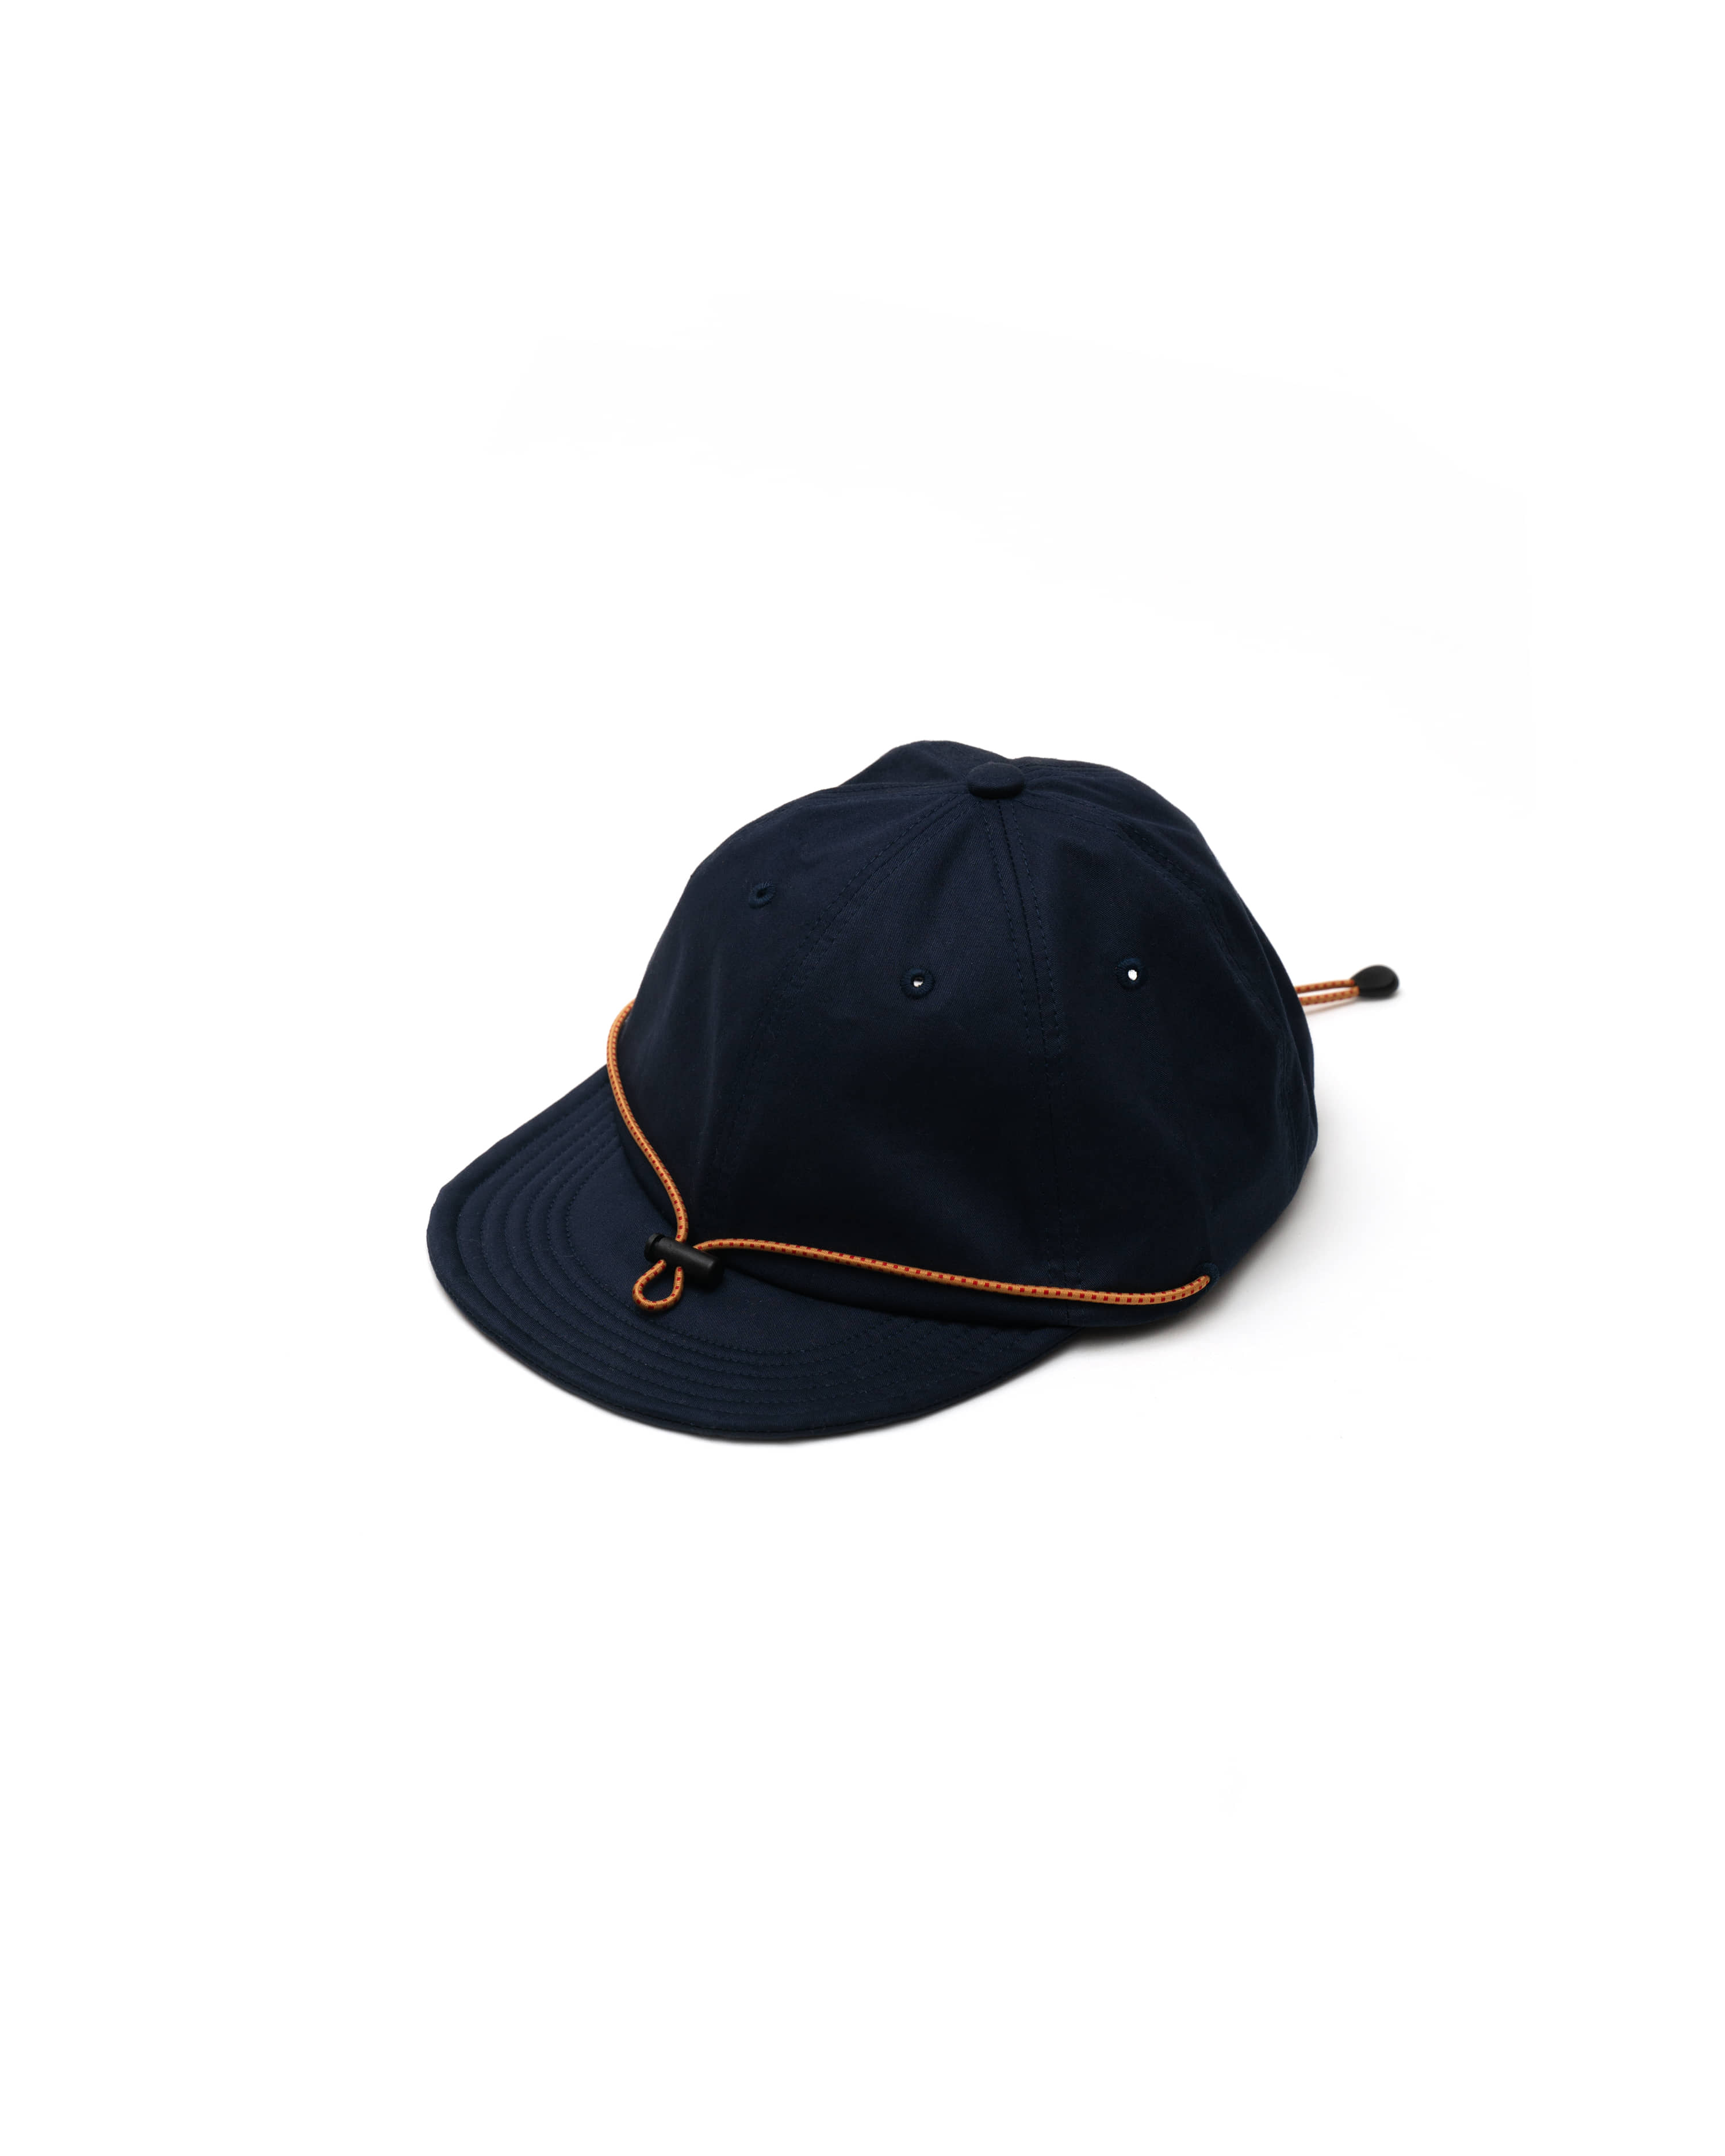 [out of stock] Town 1 - Navy